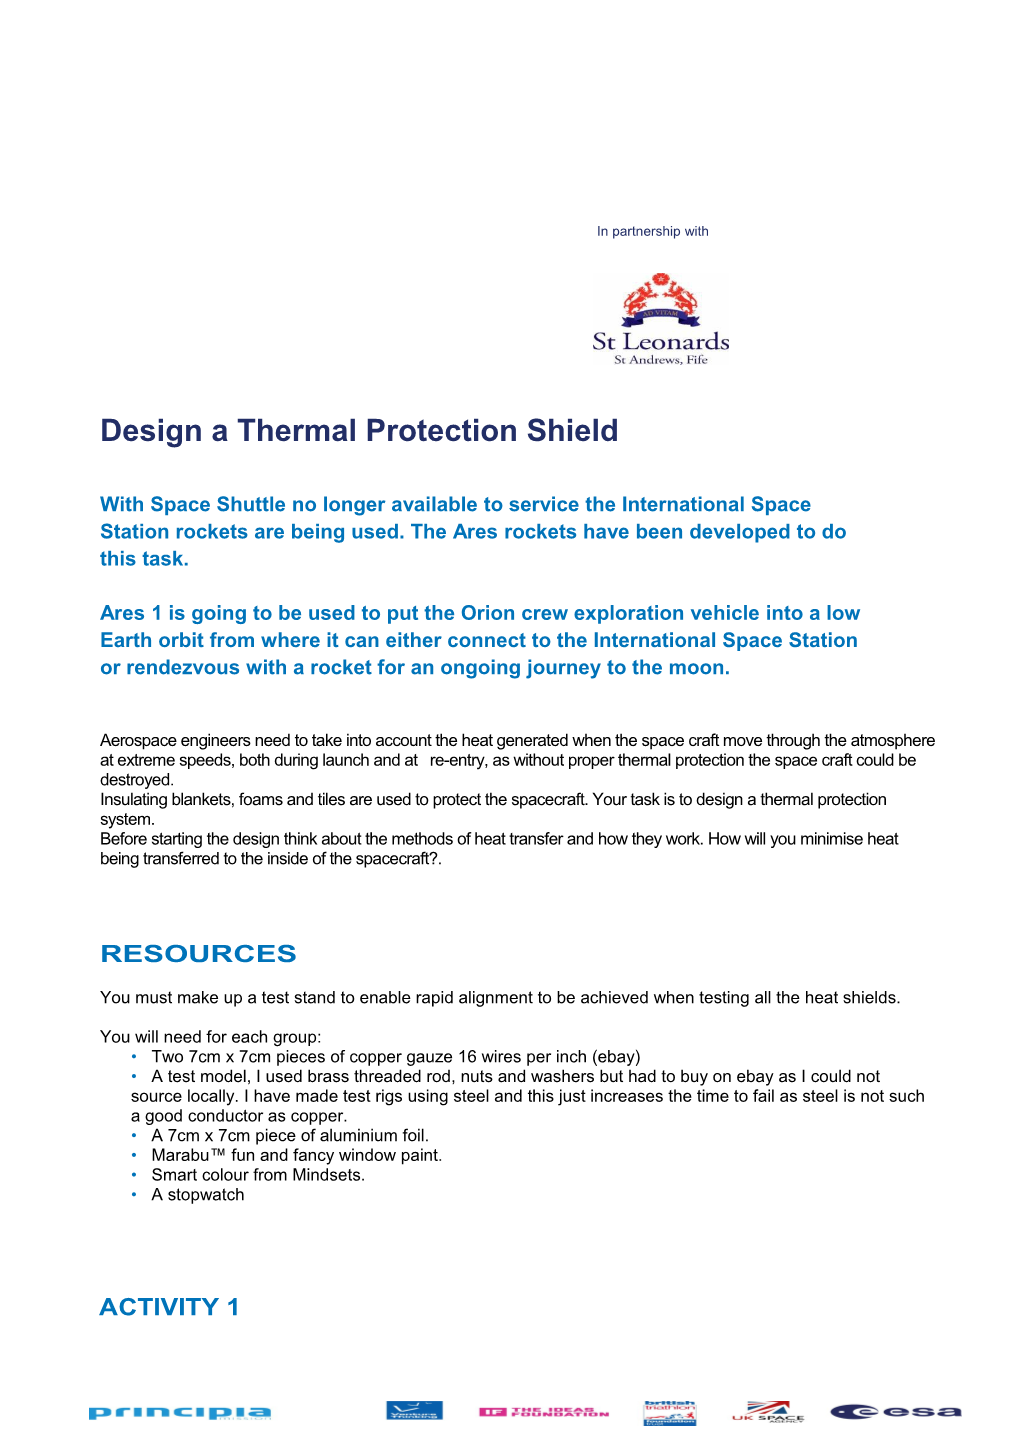 Design a Thermal Protection Shield